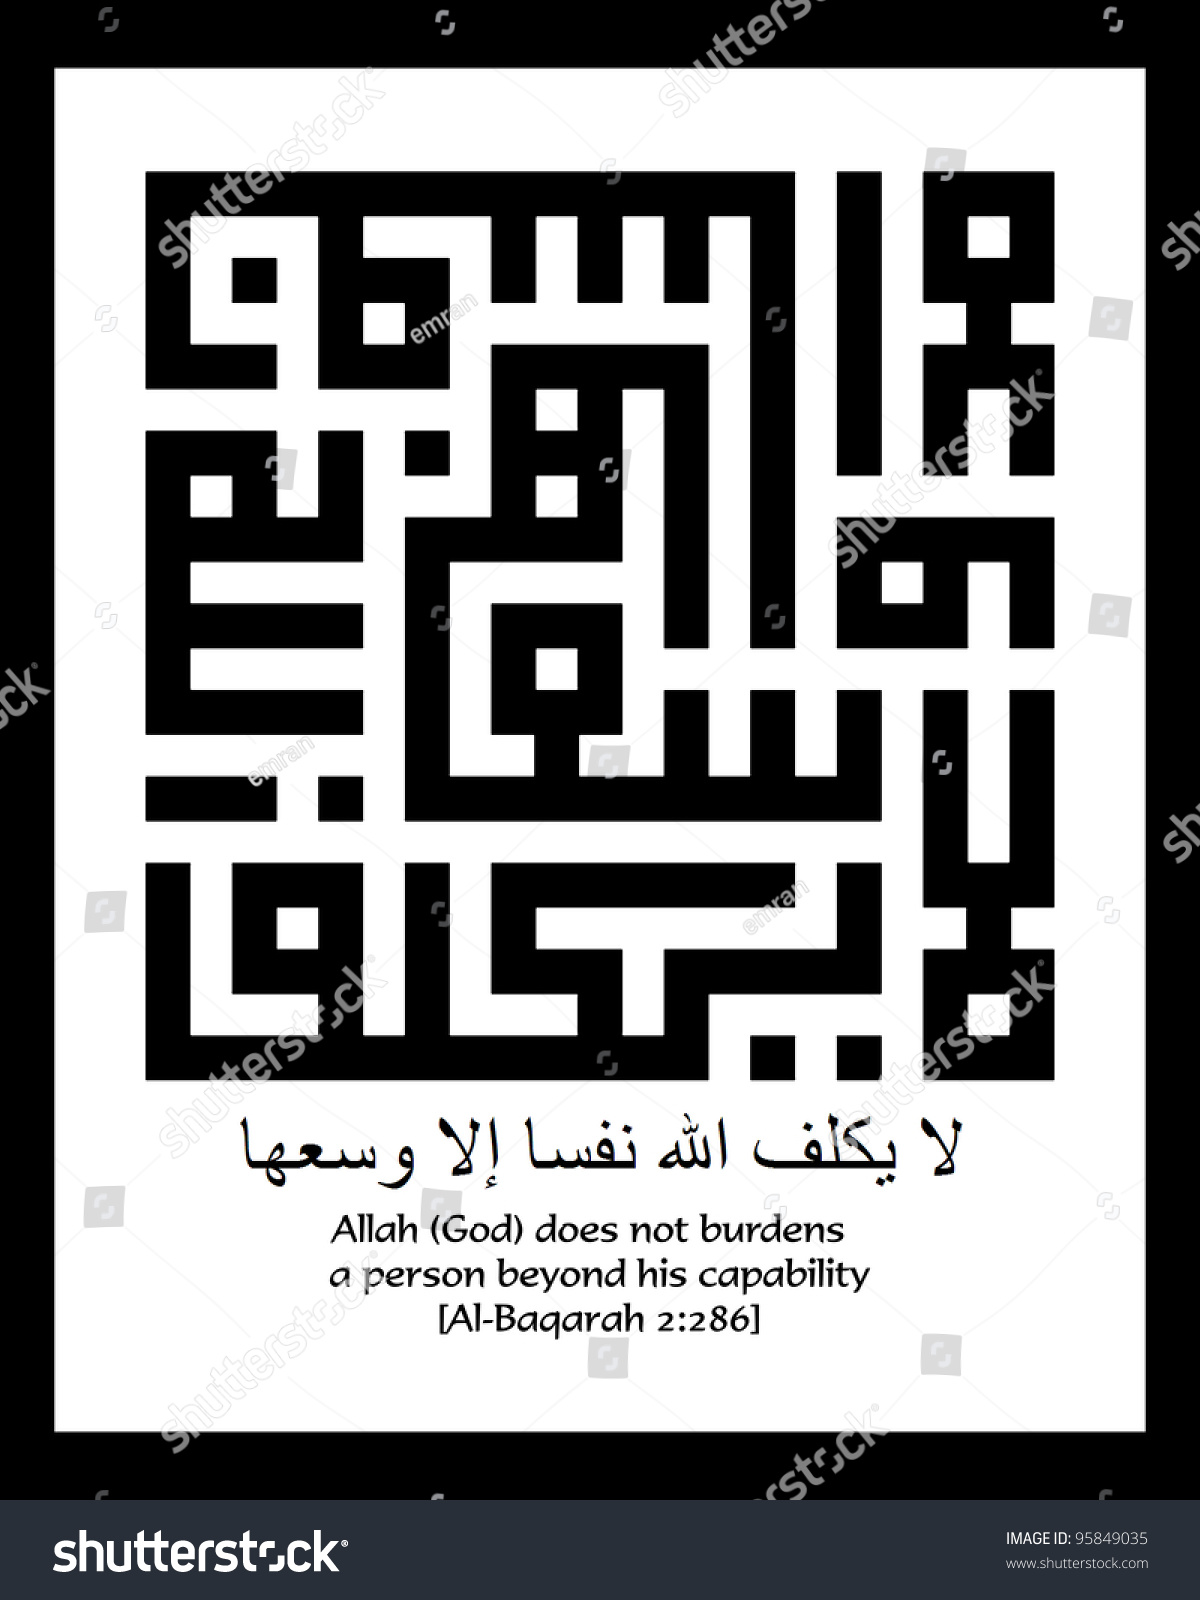 a kufi square kufic murabba arabic calligraphy version of a sentence from the